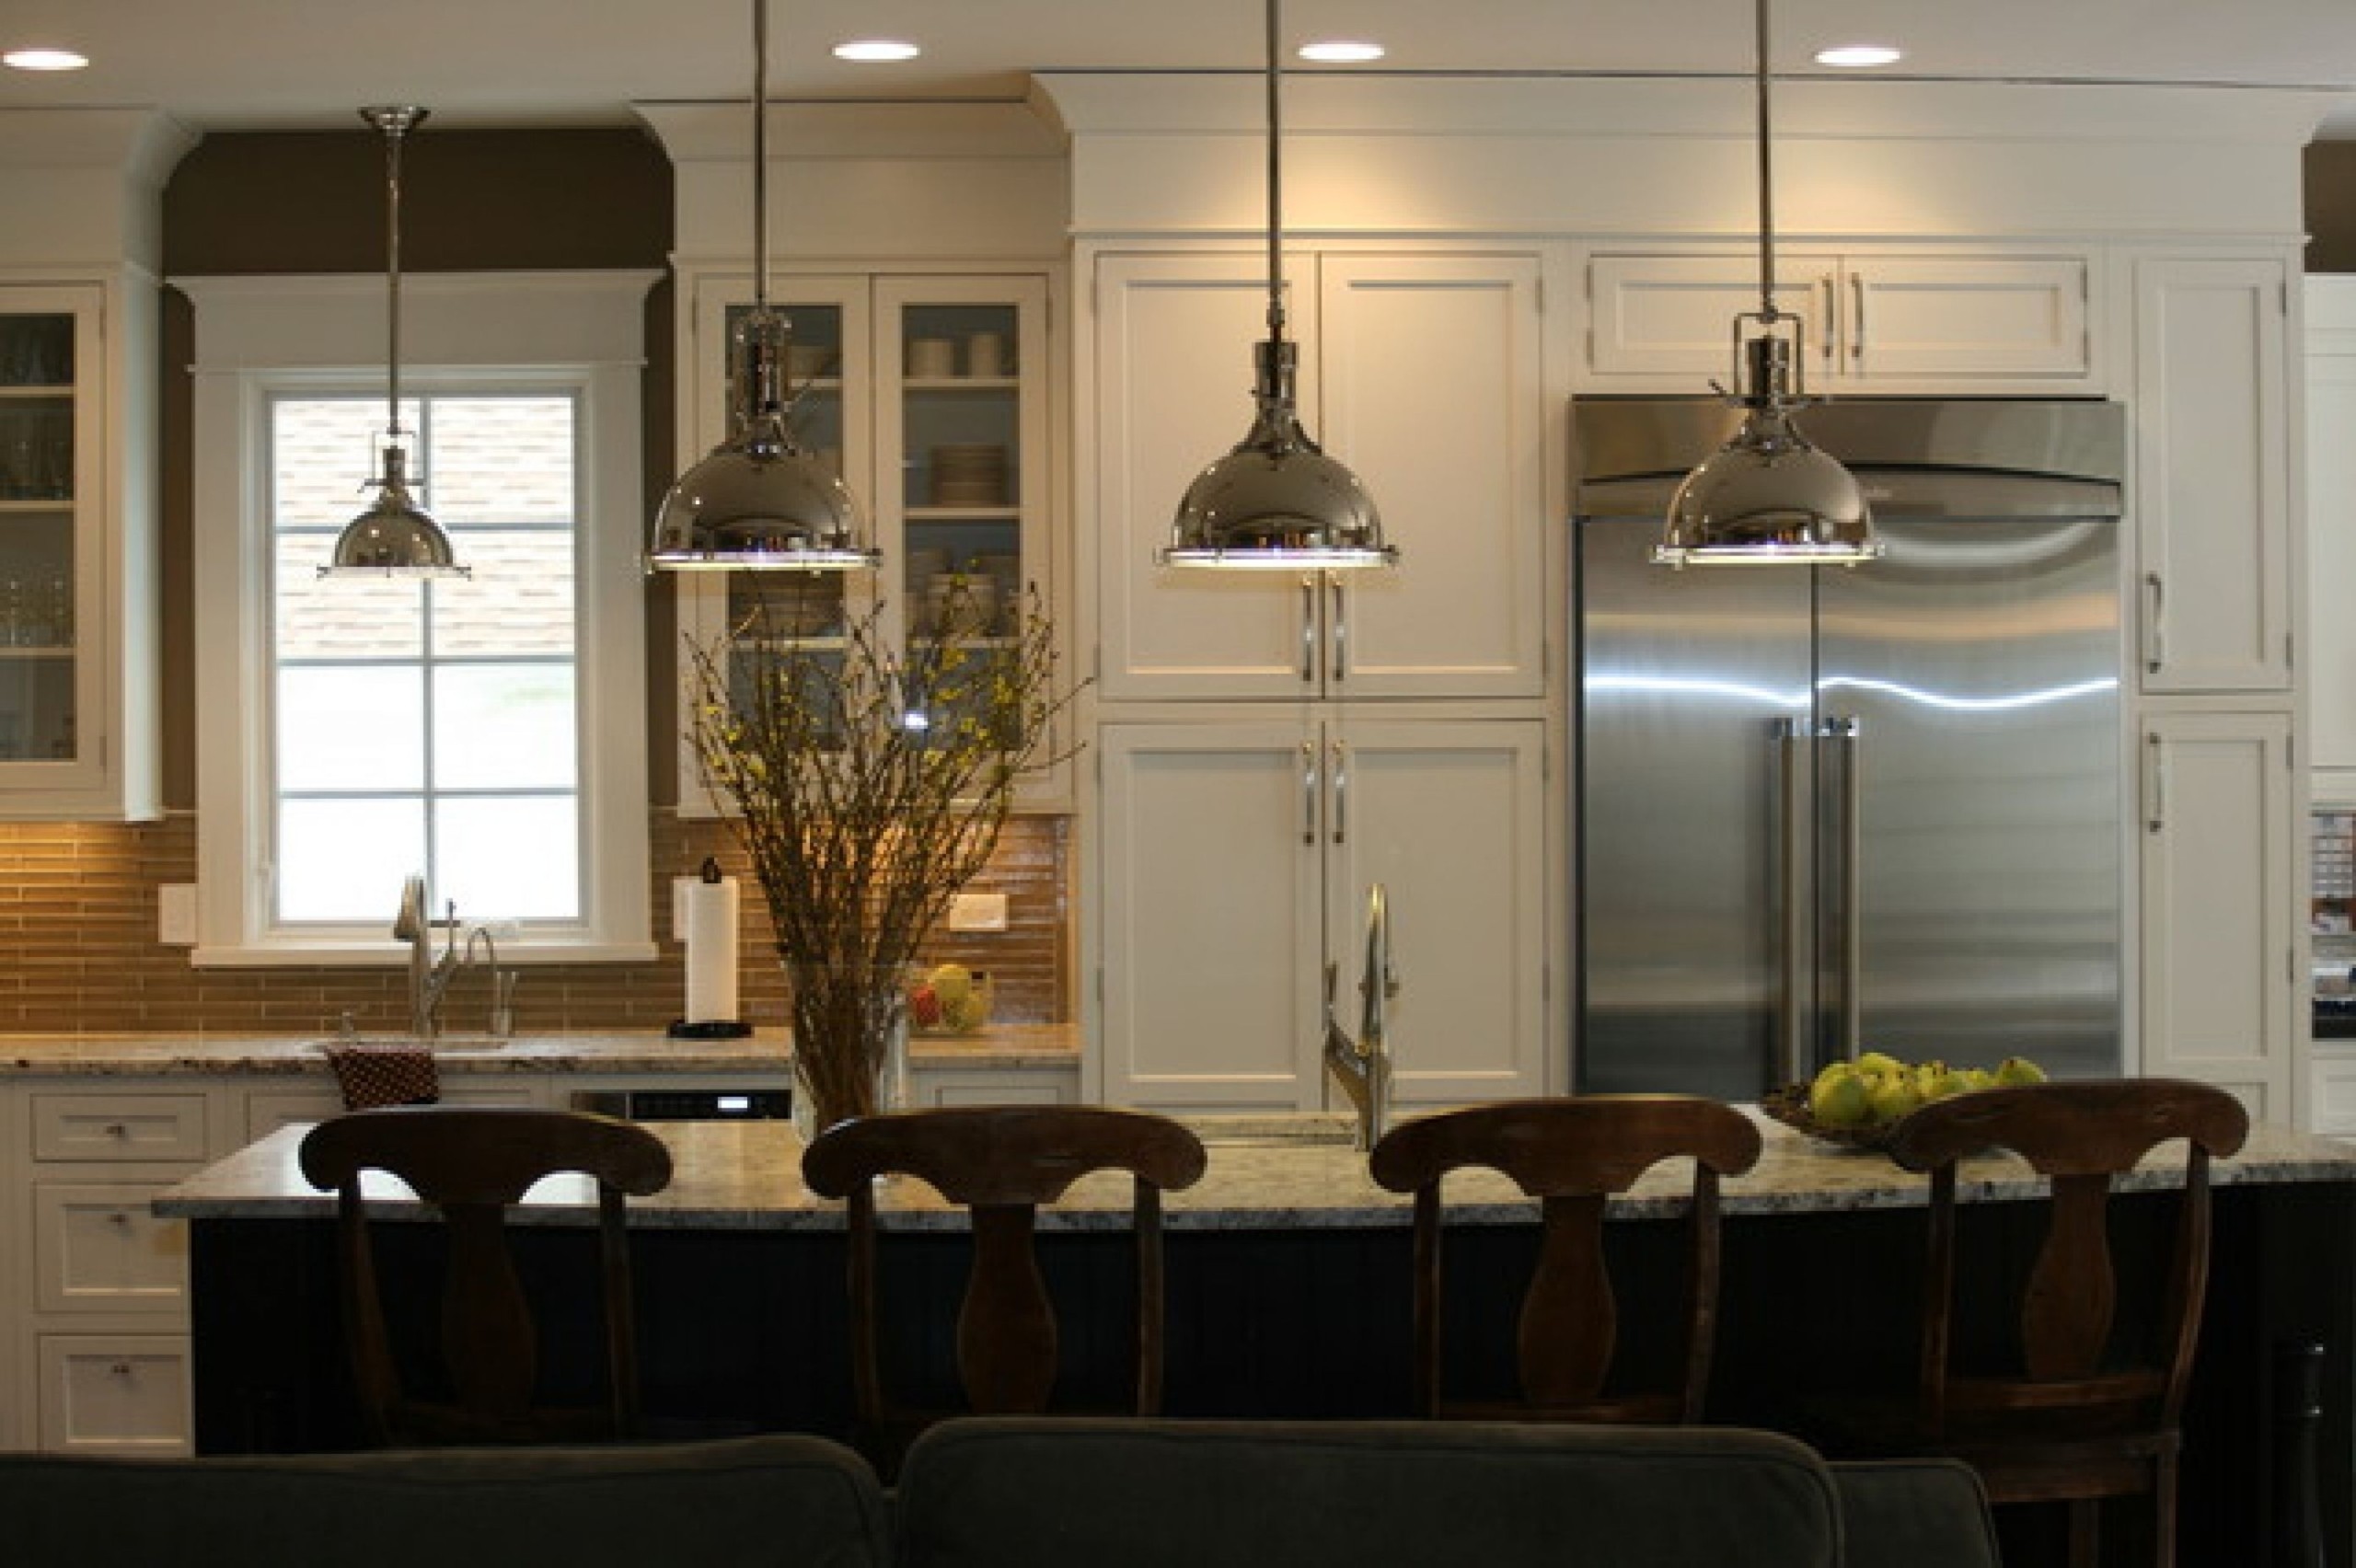 Designed kitchen island with pendant lights bring in a classic